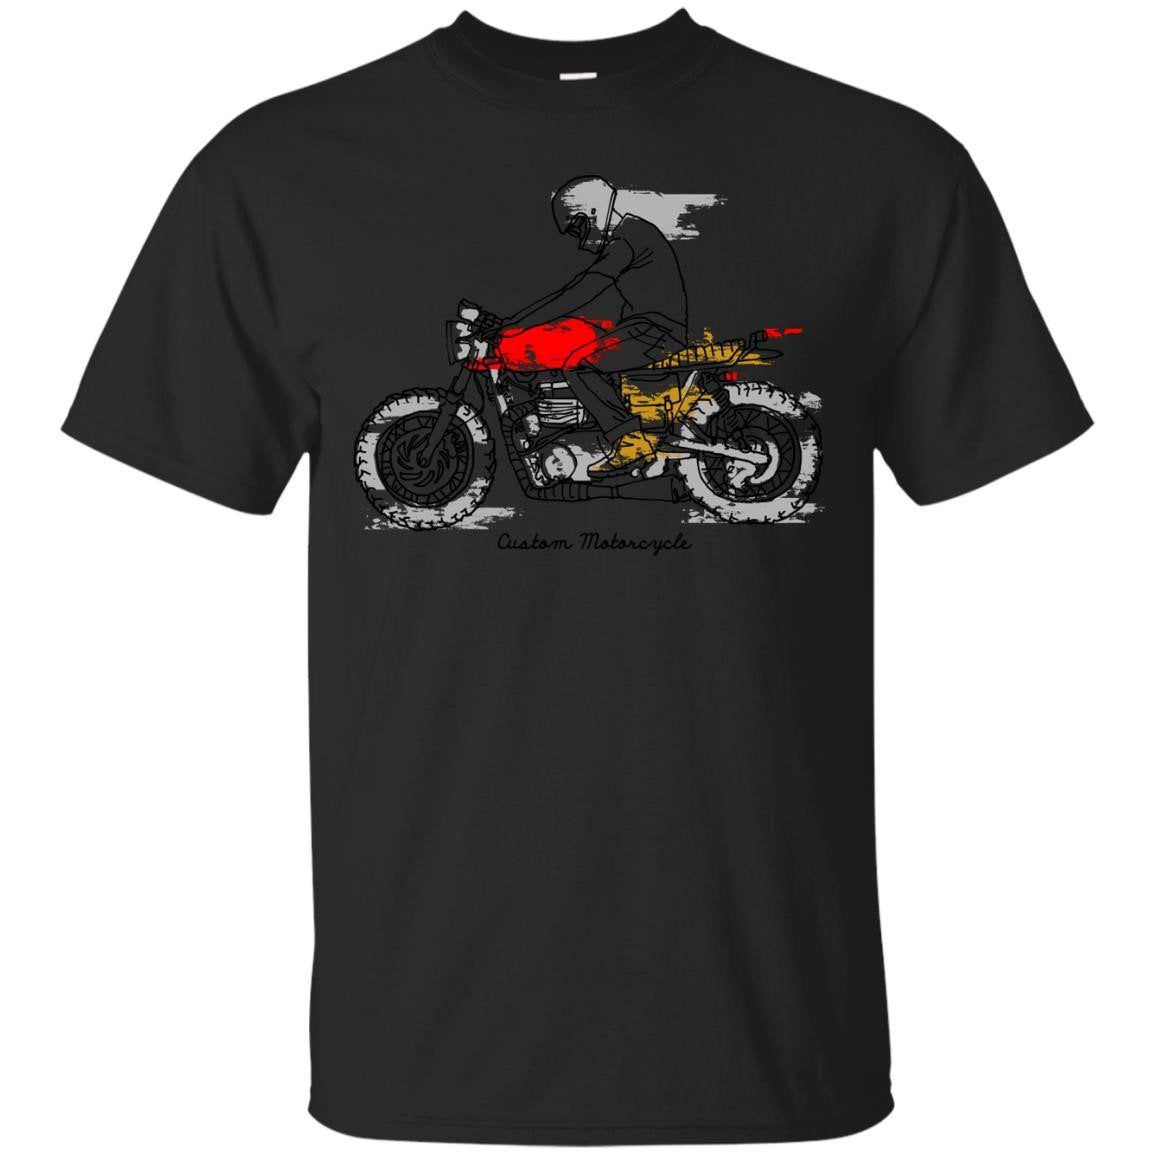 Custom Motorcycle (bright Color) T-shirt